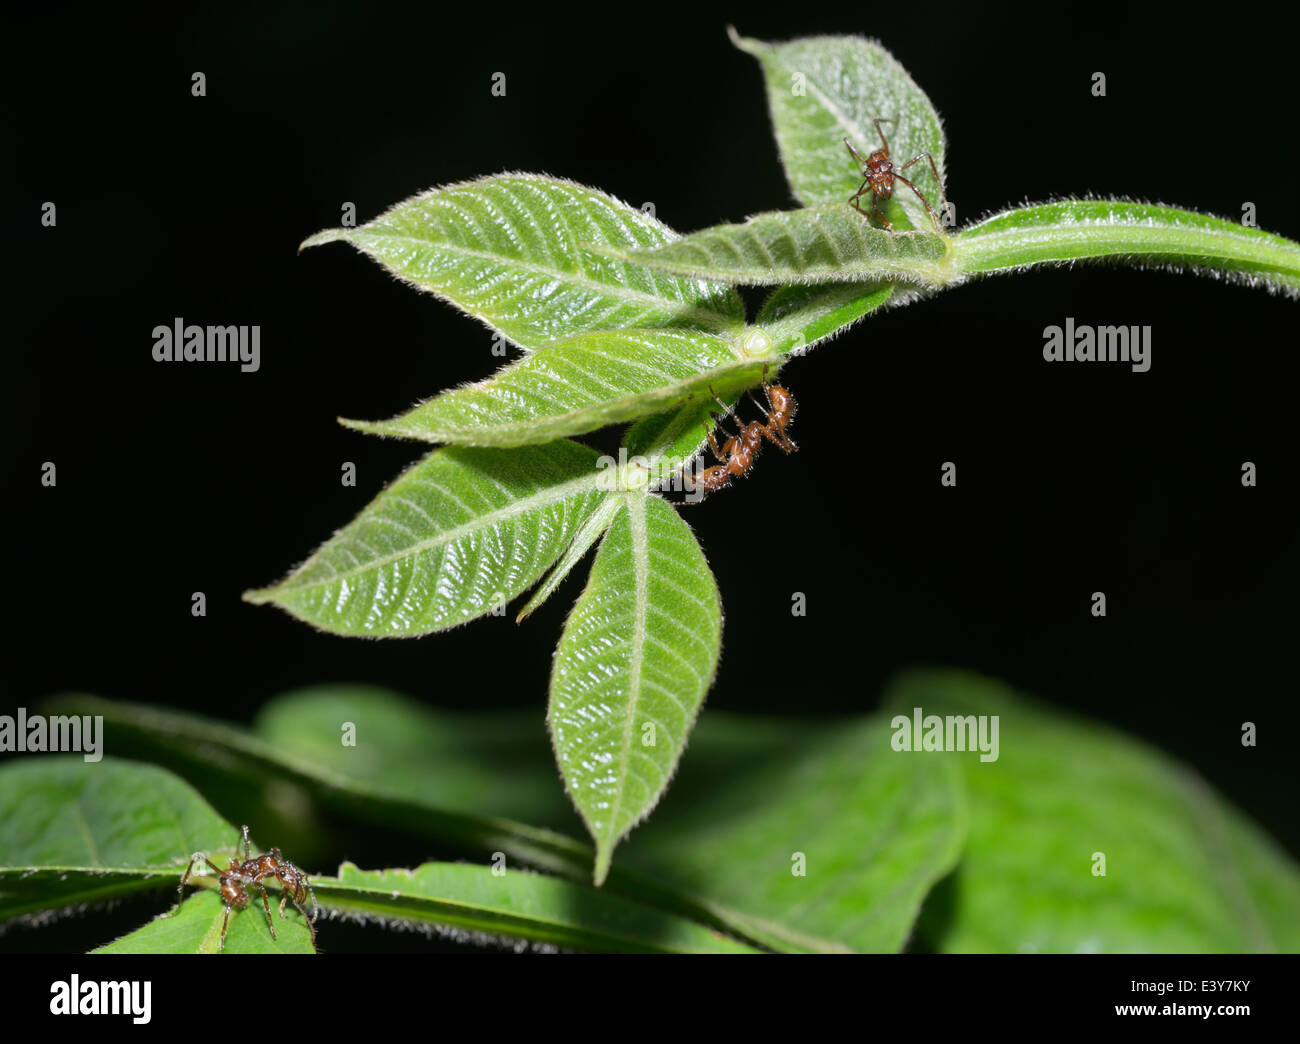 Symbiosis between ants, Azteca sp., and Inga plant that provides nectar in bowls visible at base of leaves - see description Stock Photo